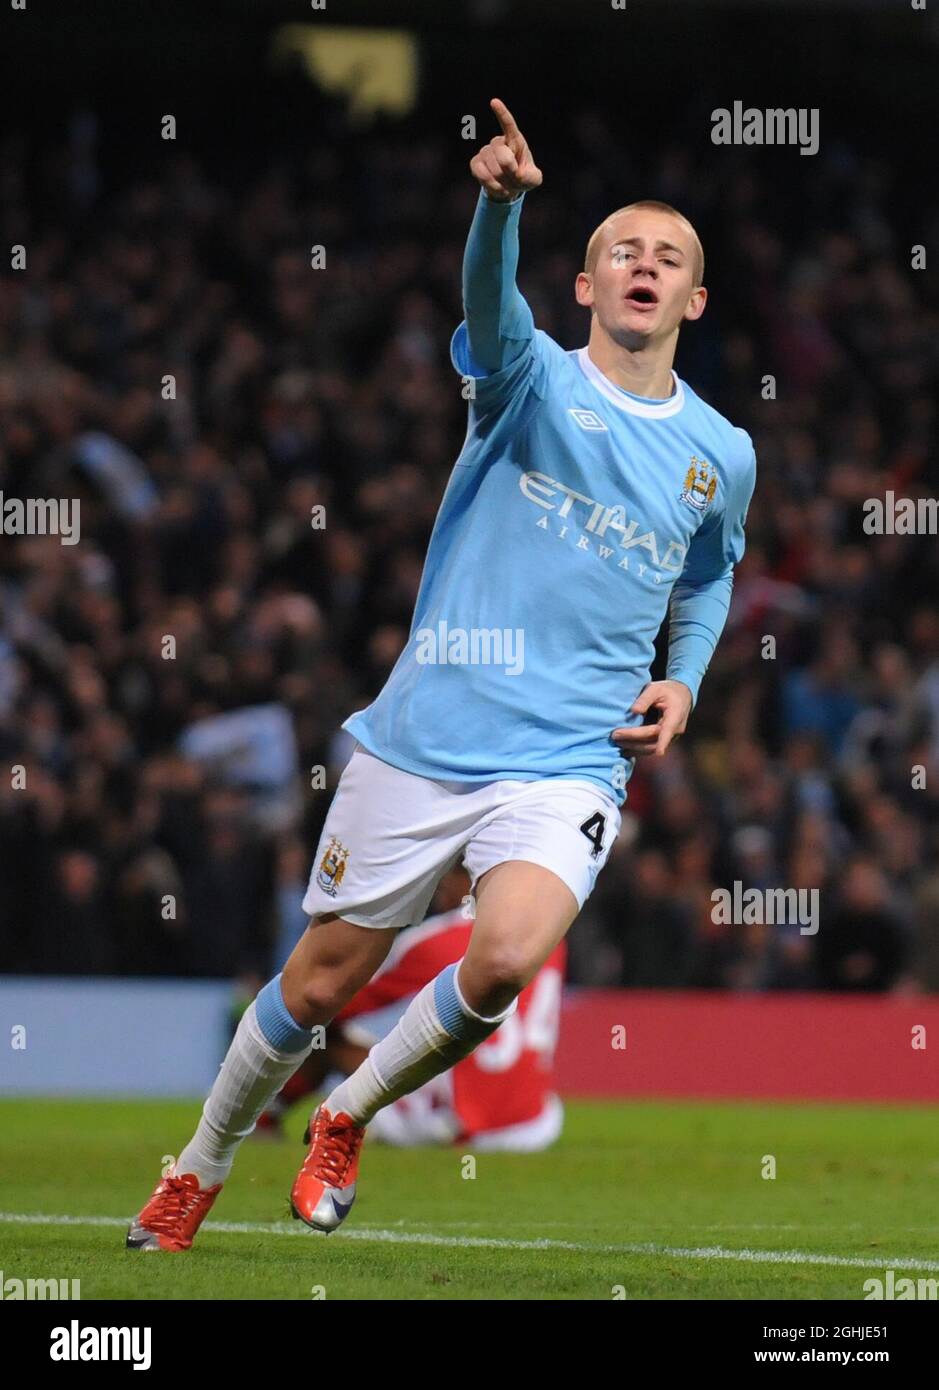 Vladimir Weiss of Manchester City celebrates scoring the third goal during the Carling Cup match between Manchester City v Arsenal at City of Manchester Stadium. Stock Photo